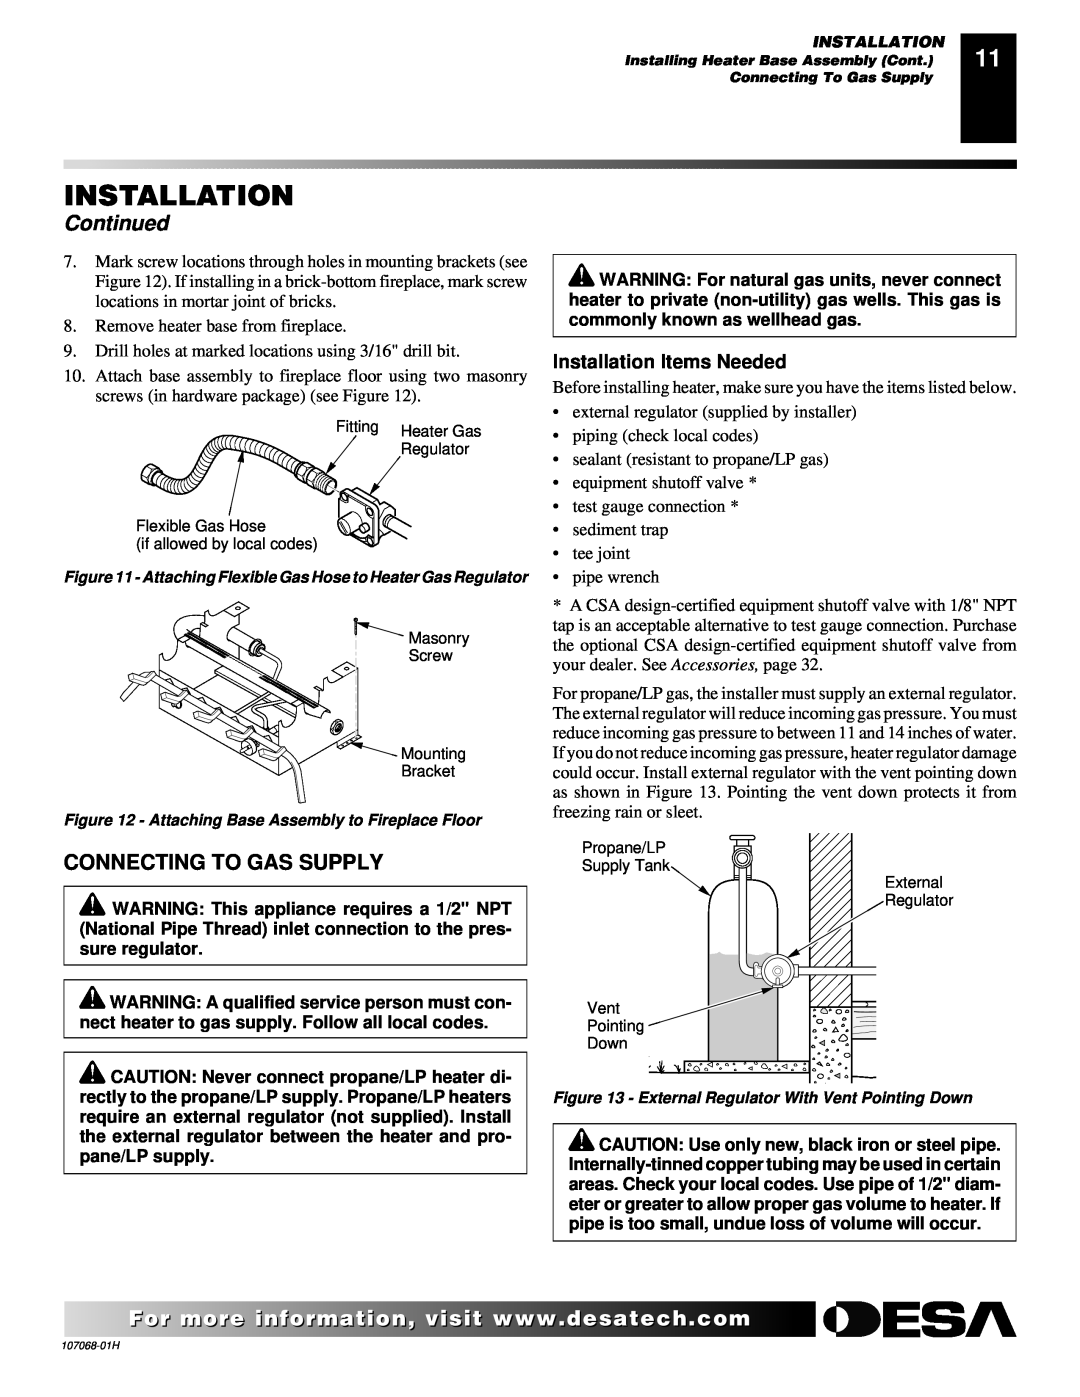 Desa SGS3124P, CLD3018PT, CLD3018NT, SGS3124N installation manual Connecting To Gas Supply, Installation, Continued 